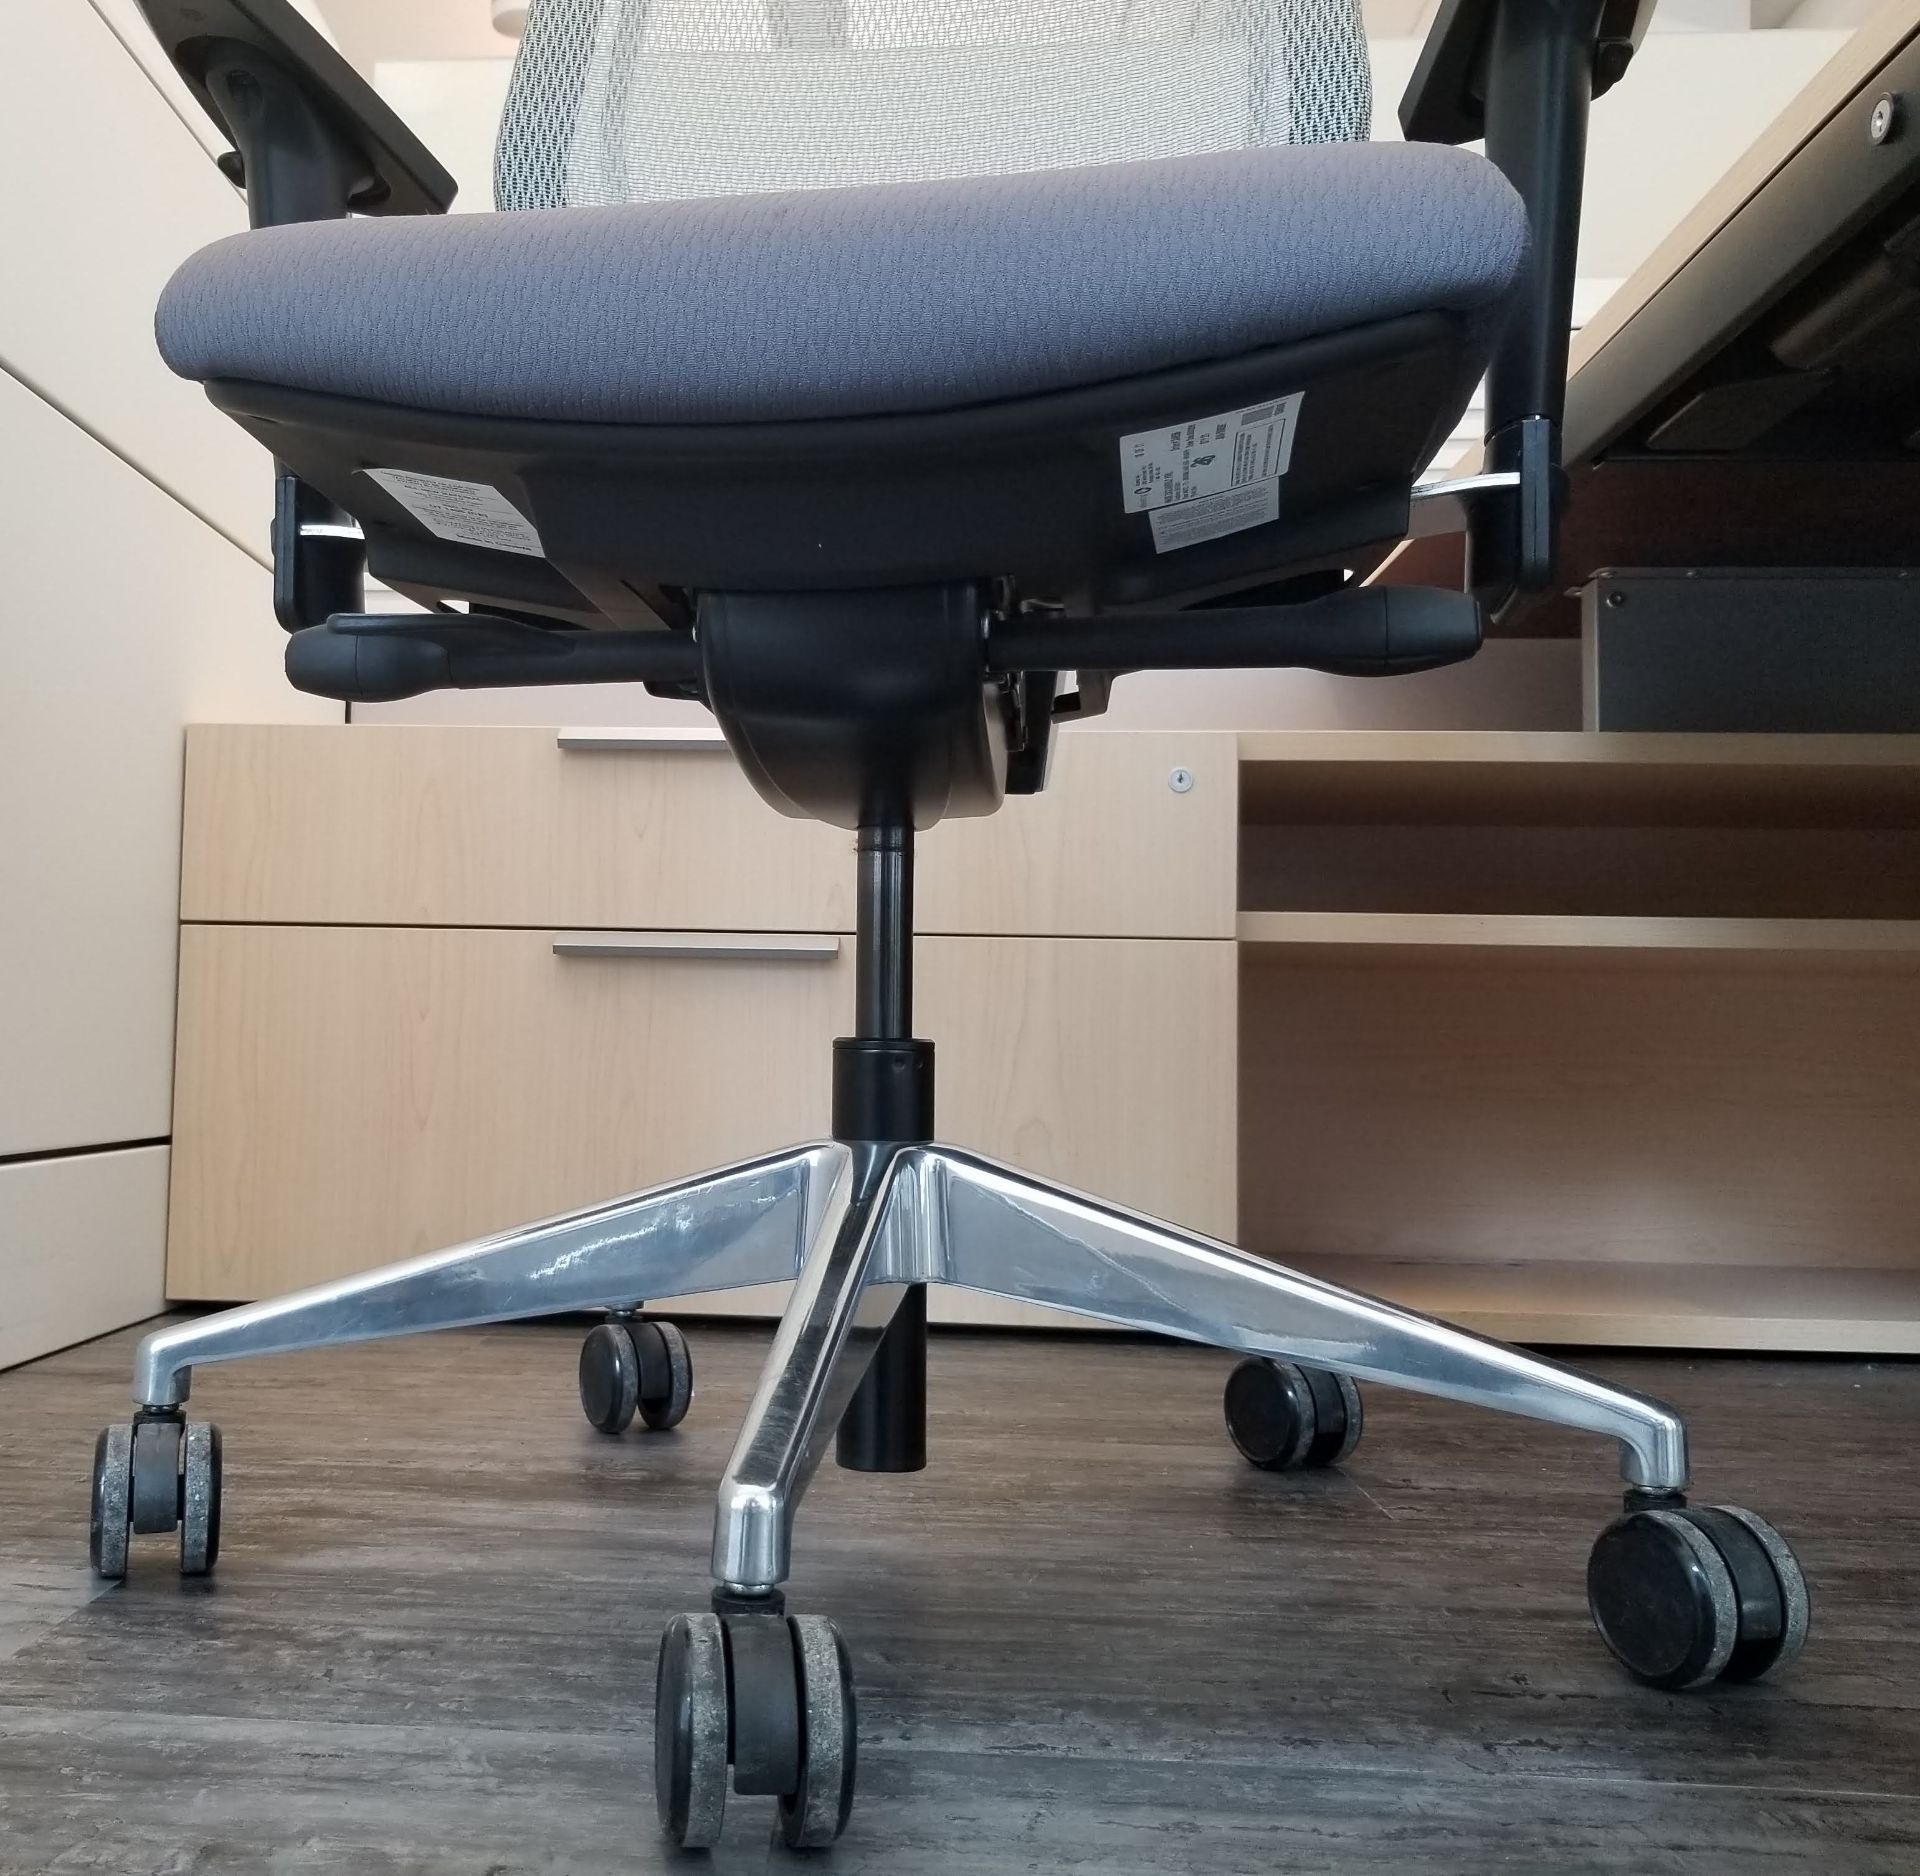 ALLSEATING - EXEC. CHAIR ON CASTERS, GREY W/ MESH BACK, ADJUSTABLE HEIGHT, ADJUSTABLE ARMS - Image 3 of 6